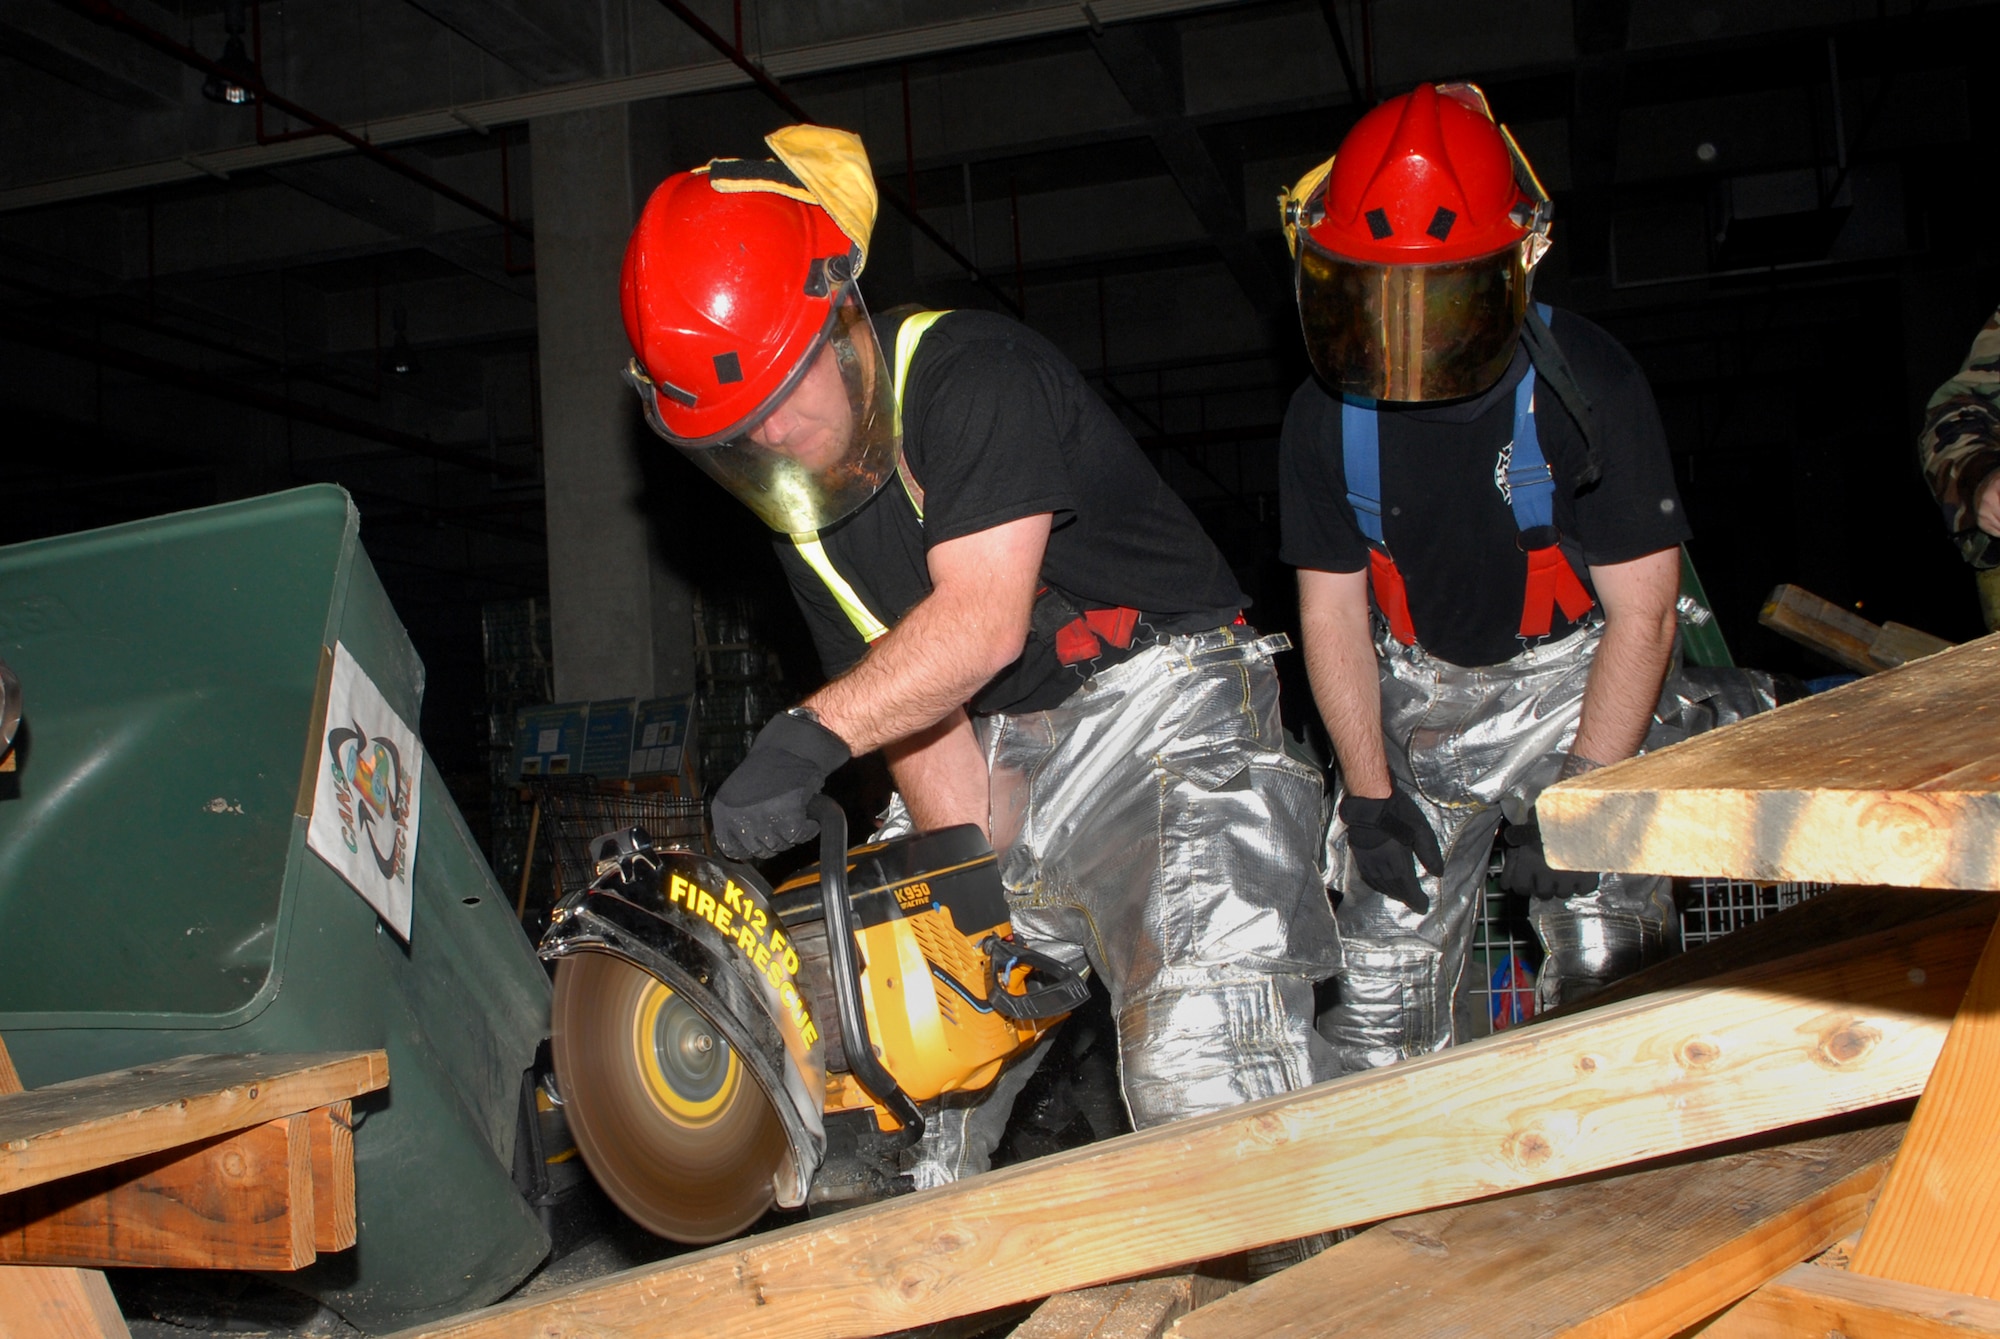 Two firefighters assigned to the 18th Civil Engineer Group, cut through debris to extricate a victim in a structural and fire scenario at Bldg. 798, during Local Operational Readiness Exercise Beverly High 08-3 at Kadena Air Base, Japan, Jan. 9, 2007. The 18th Wing conducted the exercise from Jan. 7 to 11 to test the wing's ability to respond in contingency situations. 
(U.S. Air Force photo/Staff Sgt. Chrissy FitzGerald)